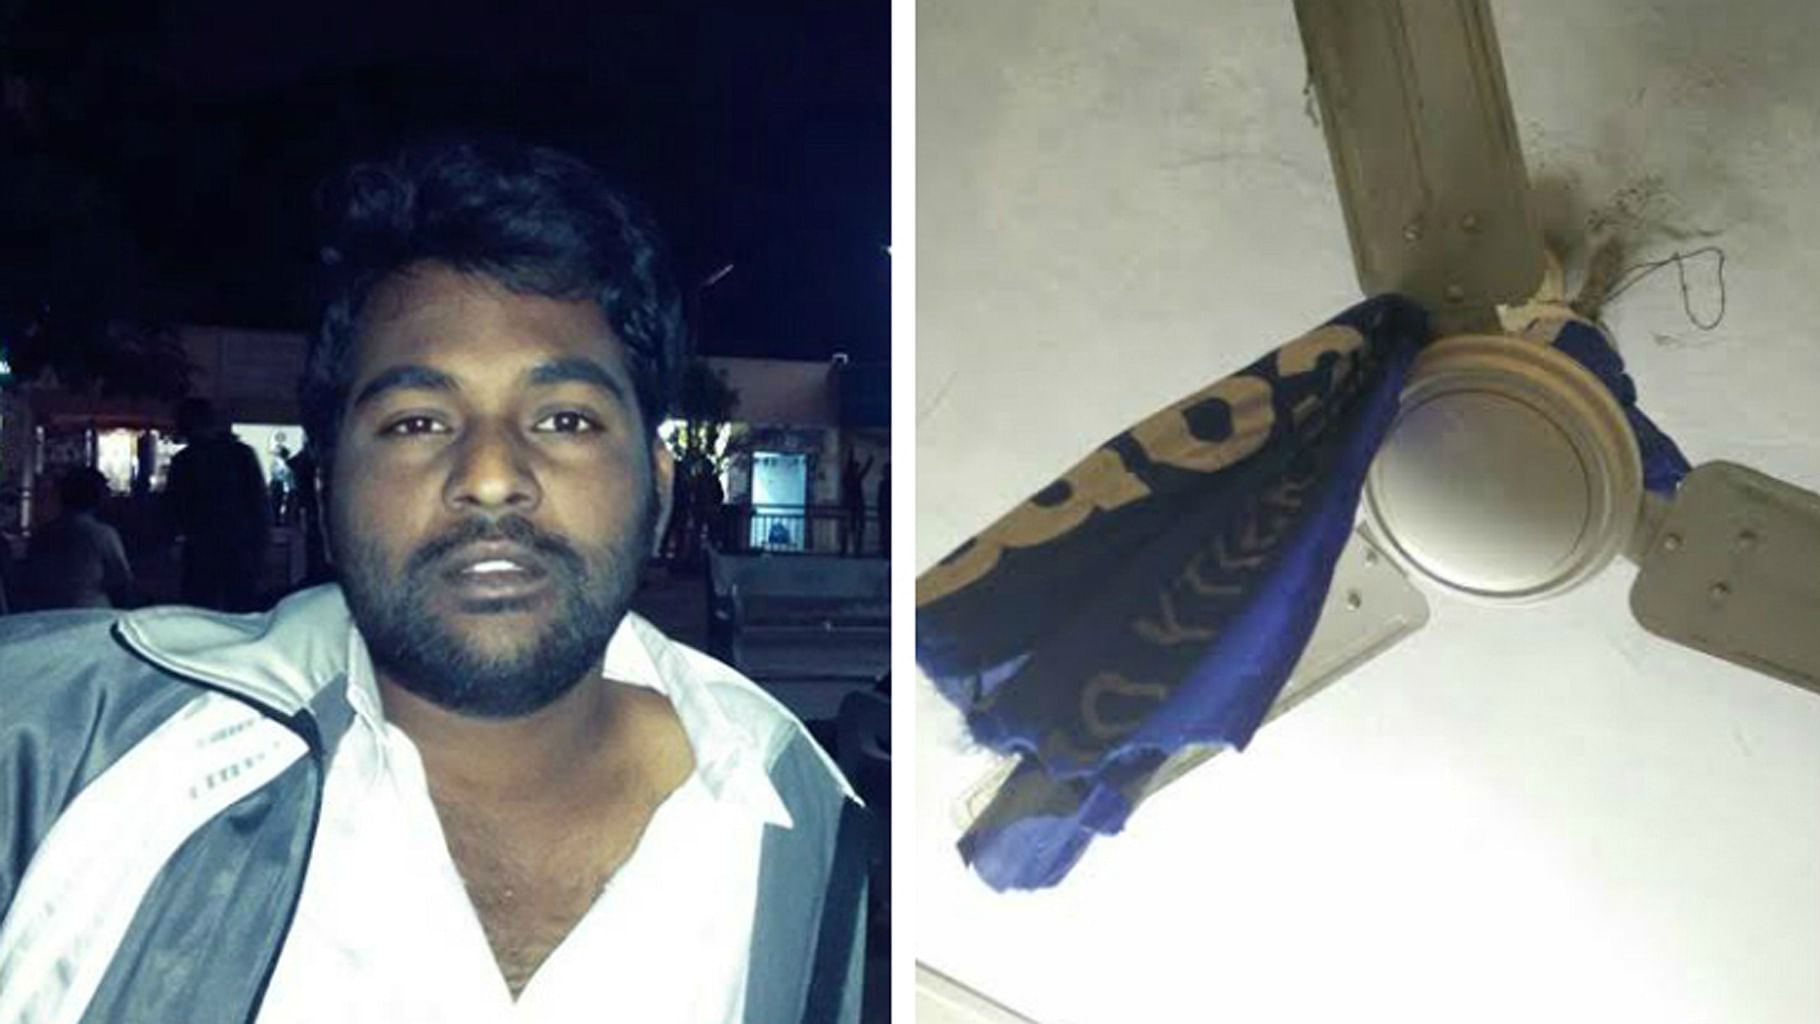 Rohit Vemula (left) and the room where he committed suicide (right). (Photo: The News Minute)